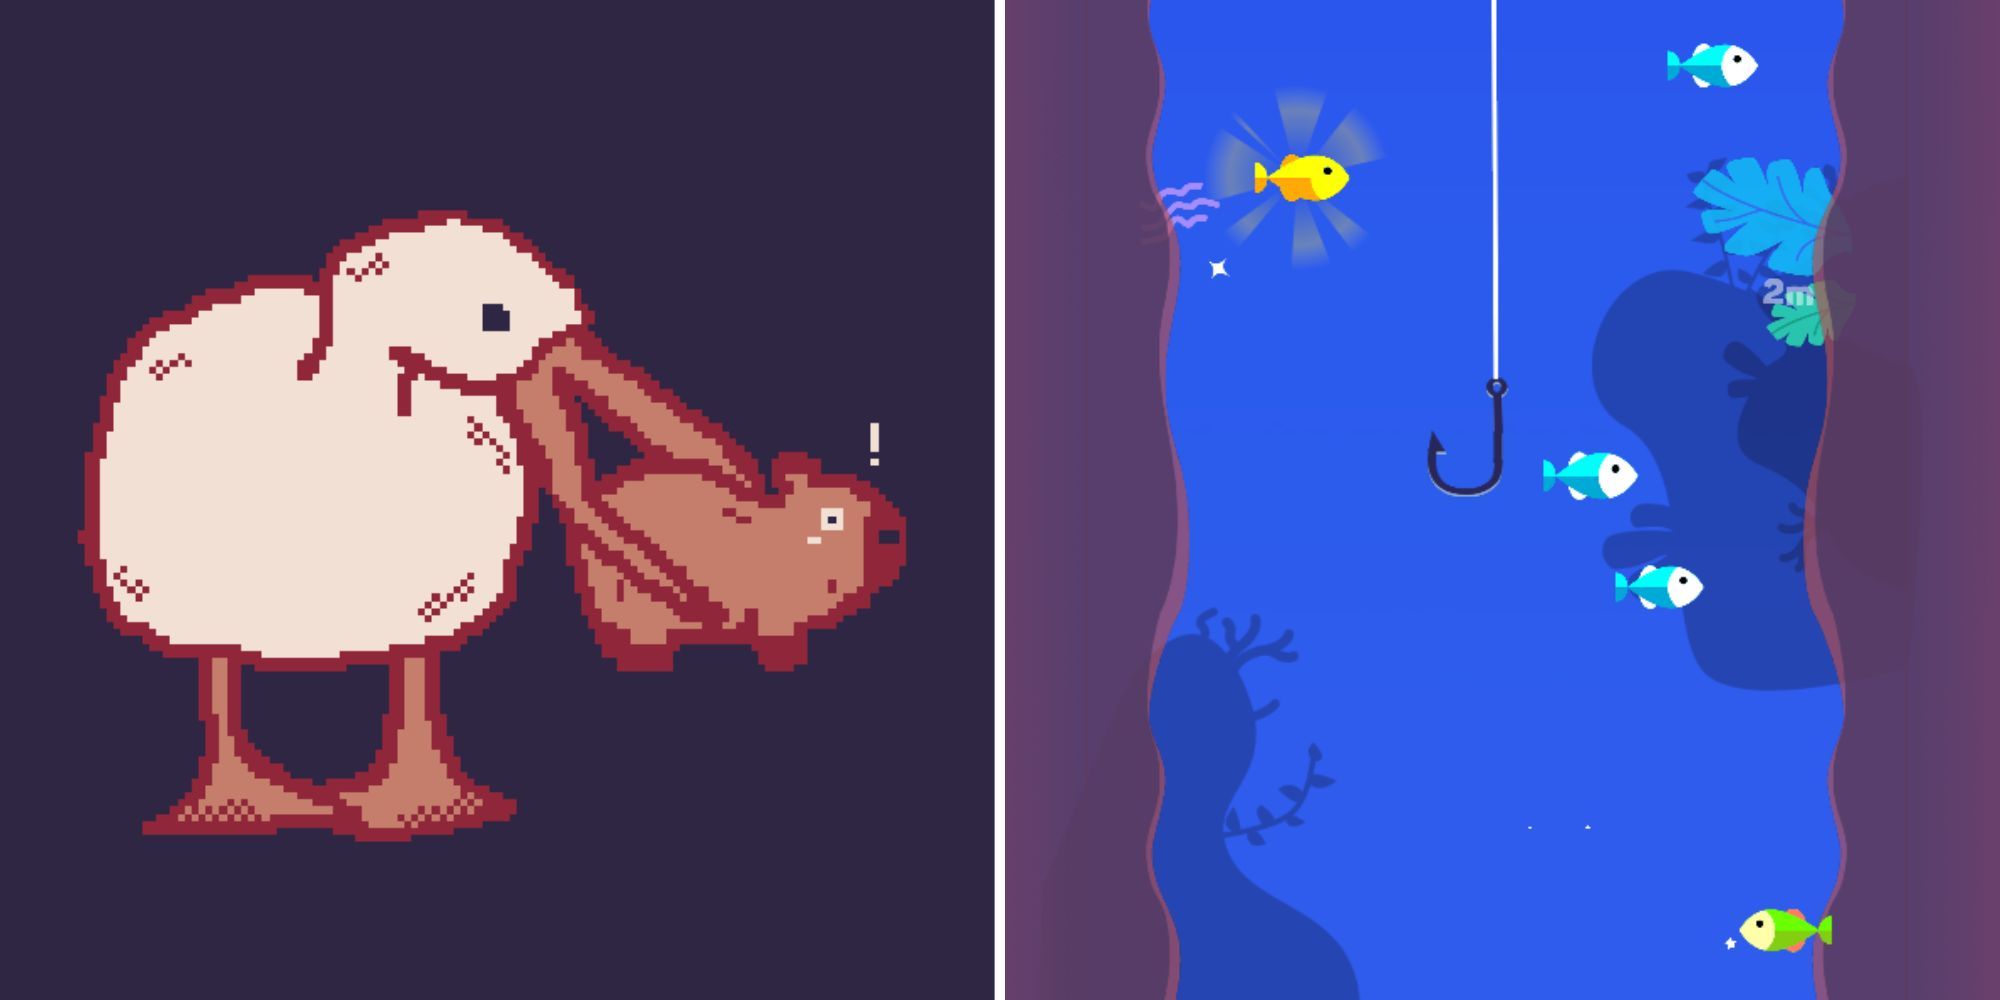 A split image of a pixel art bird holding a baby capybara in its beak, and a 2D view of a fishing hook and multi-colored fish.